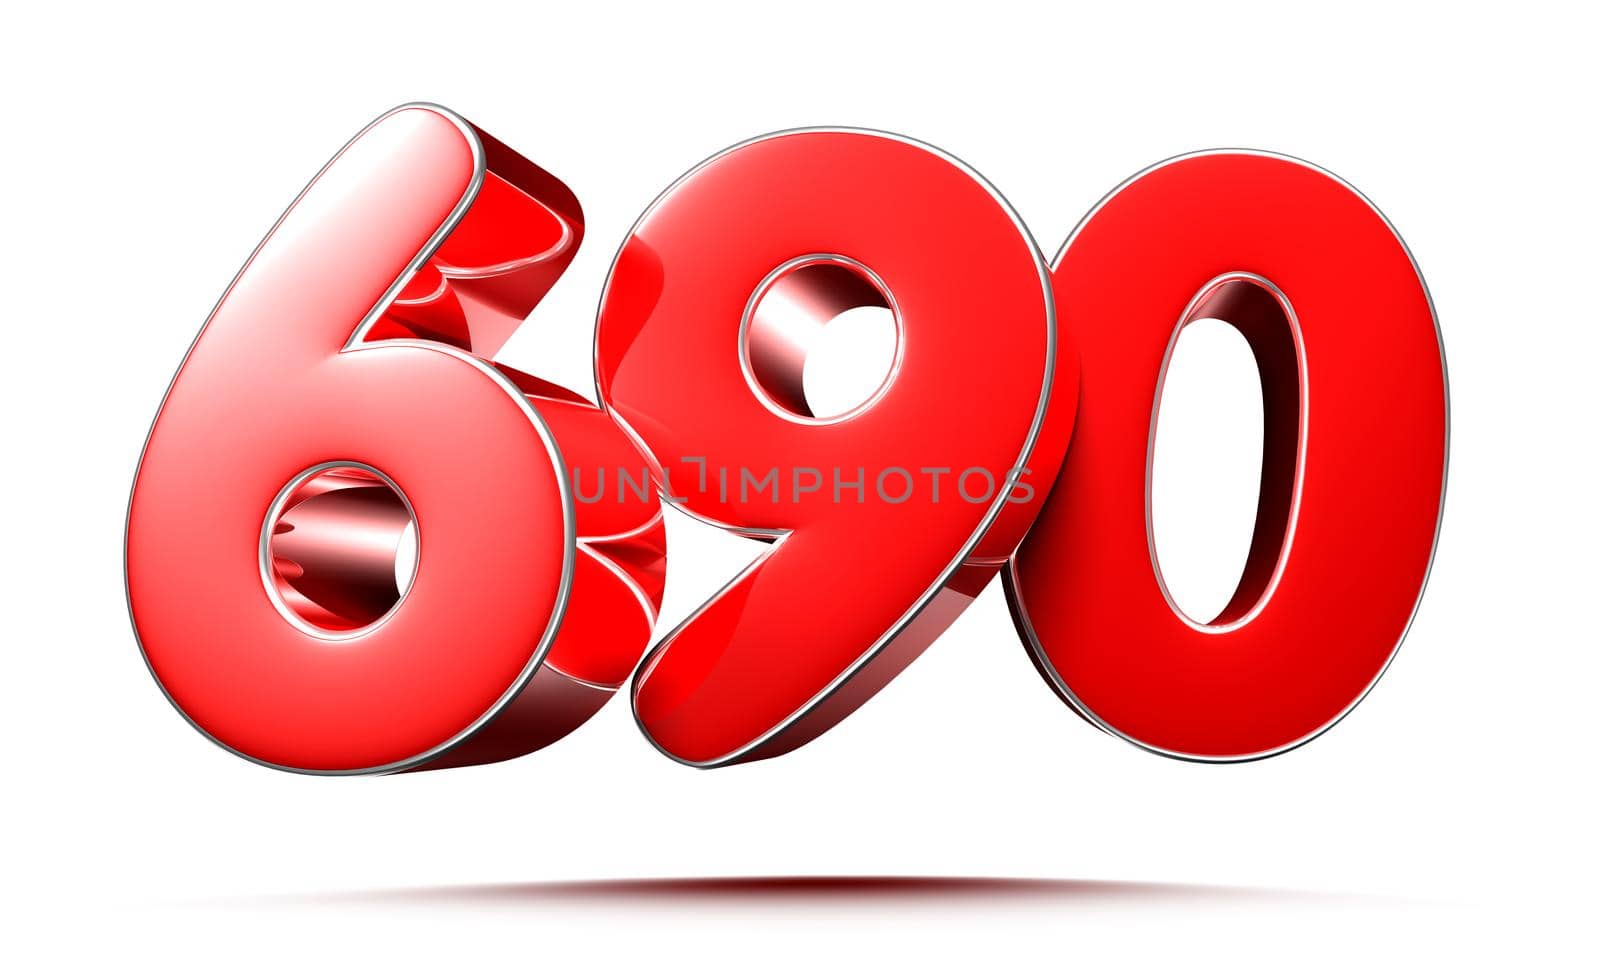 Rounded red numbers 690 on white background 3D illustration with clipping path